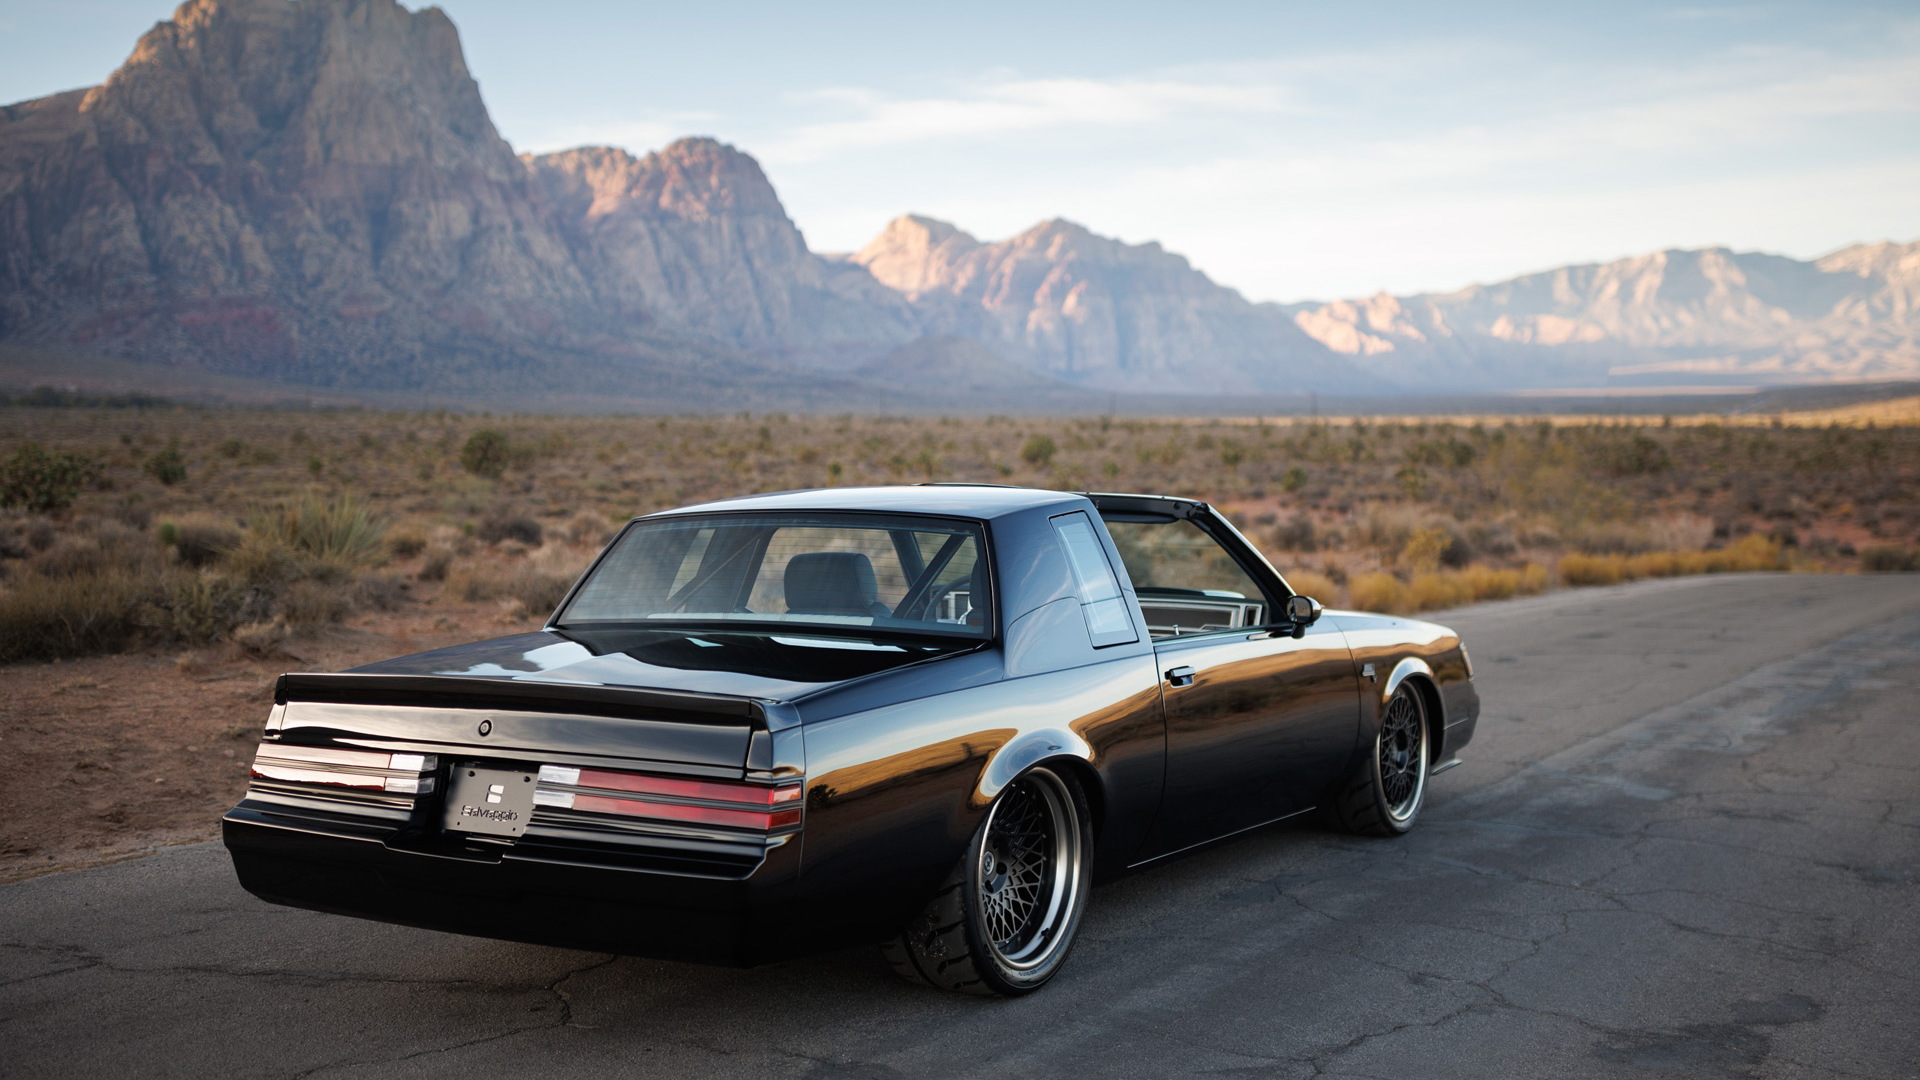 Kevin Hart’s 1987 Buick Grand National by Salvaggio Design